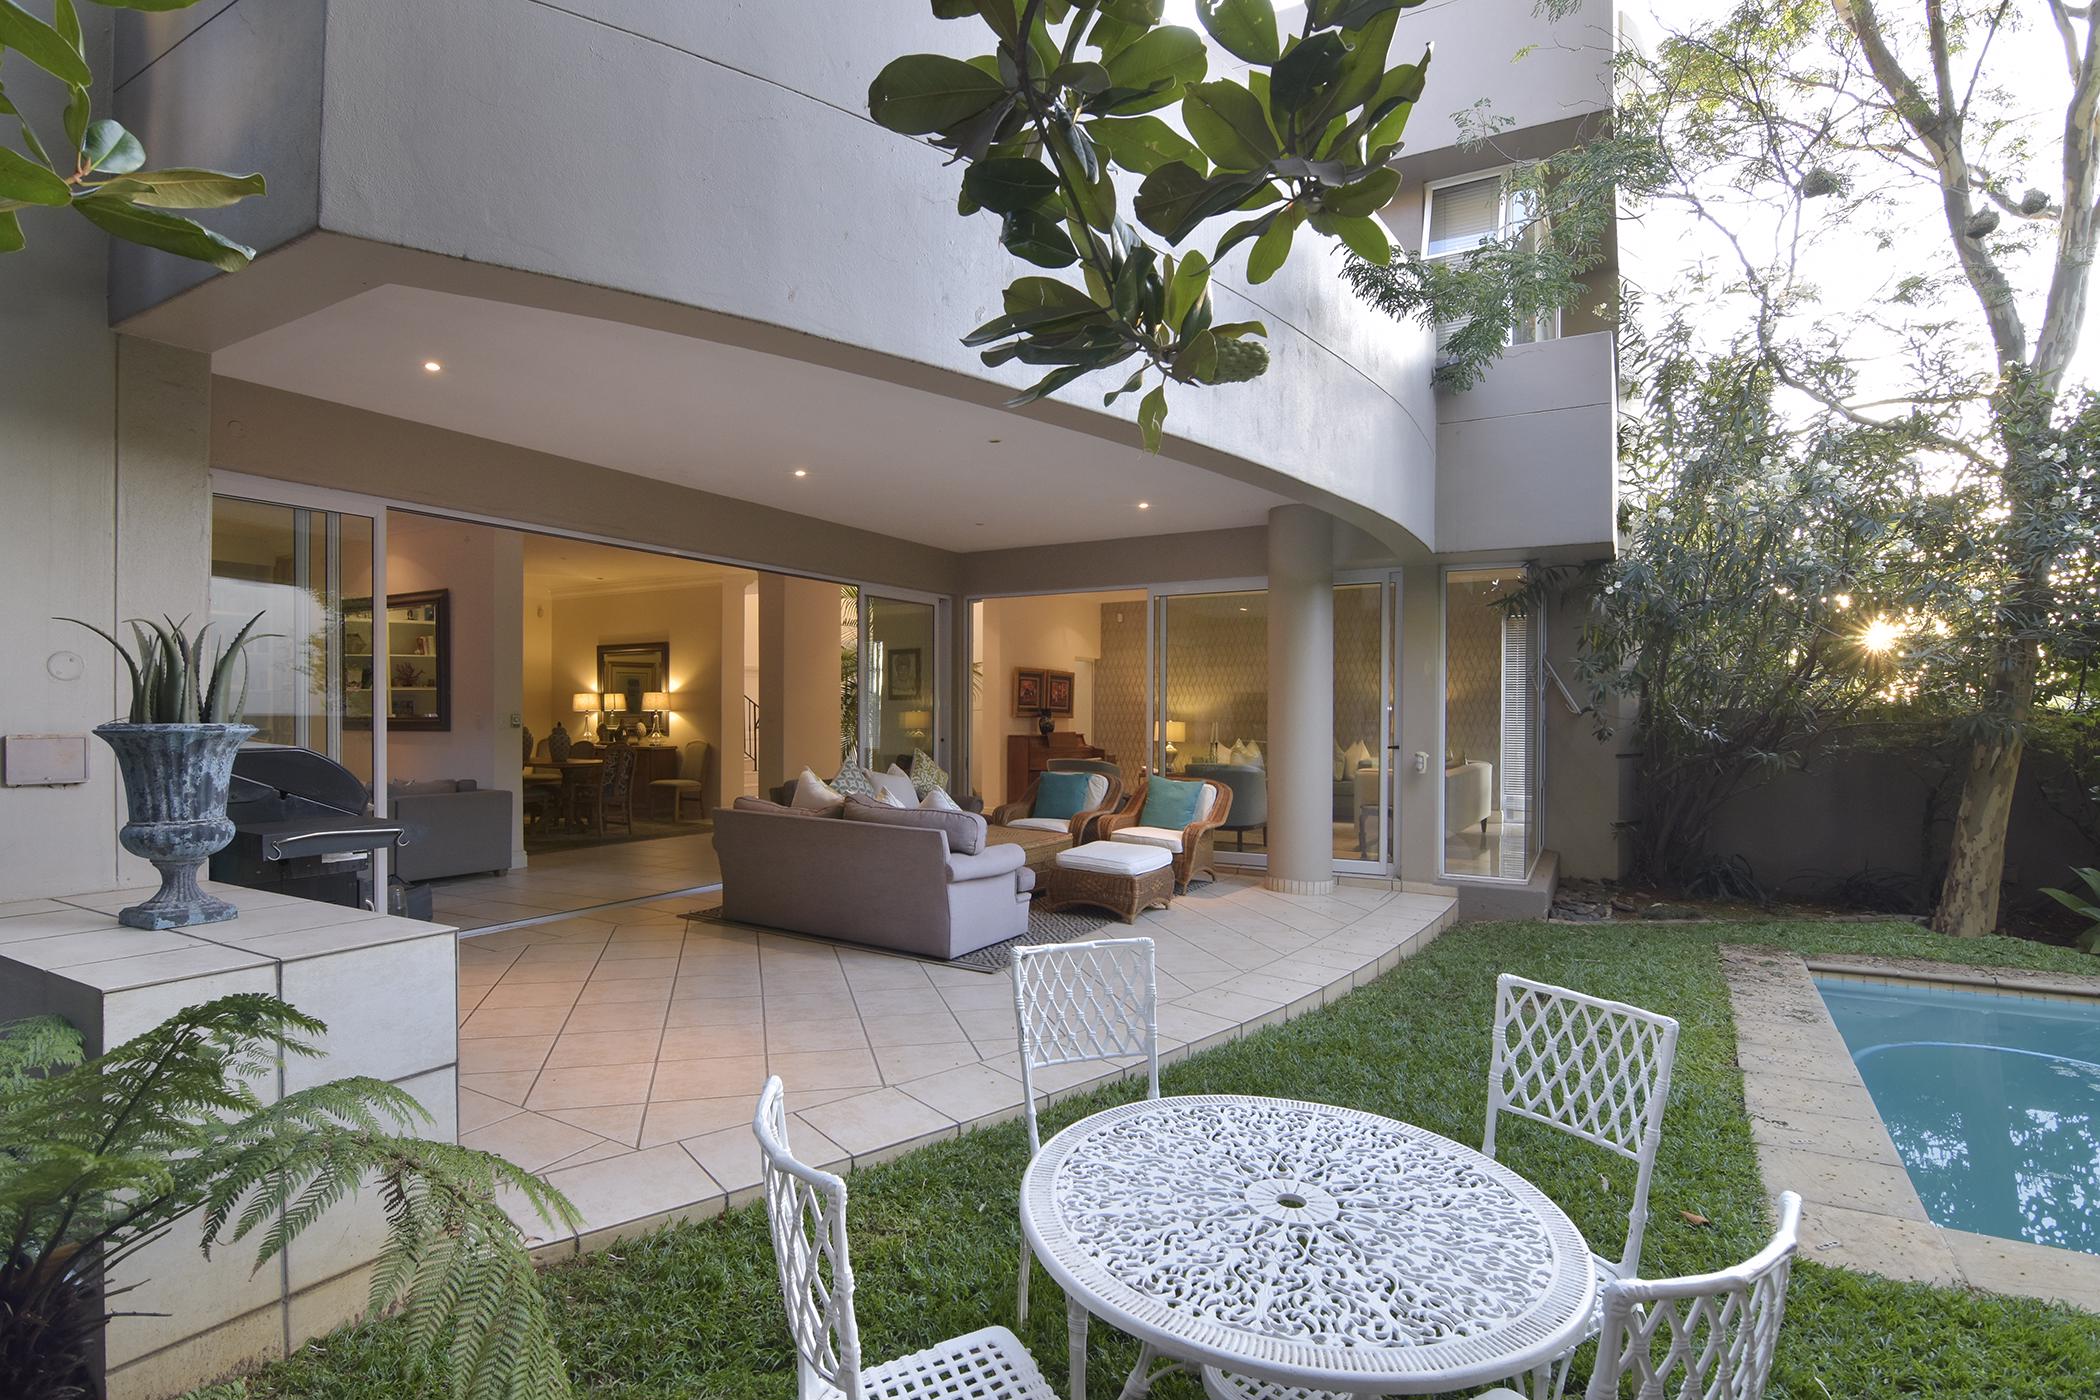 Modern Contemporary 3 bedroom cluster house for sale in Hyde Park, Sandton